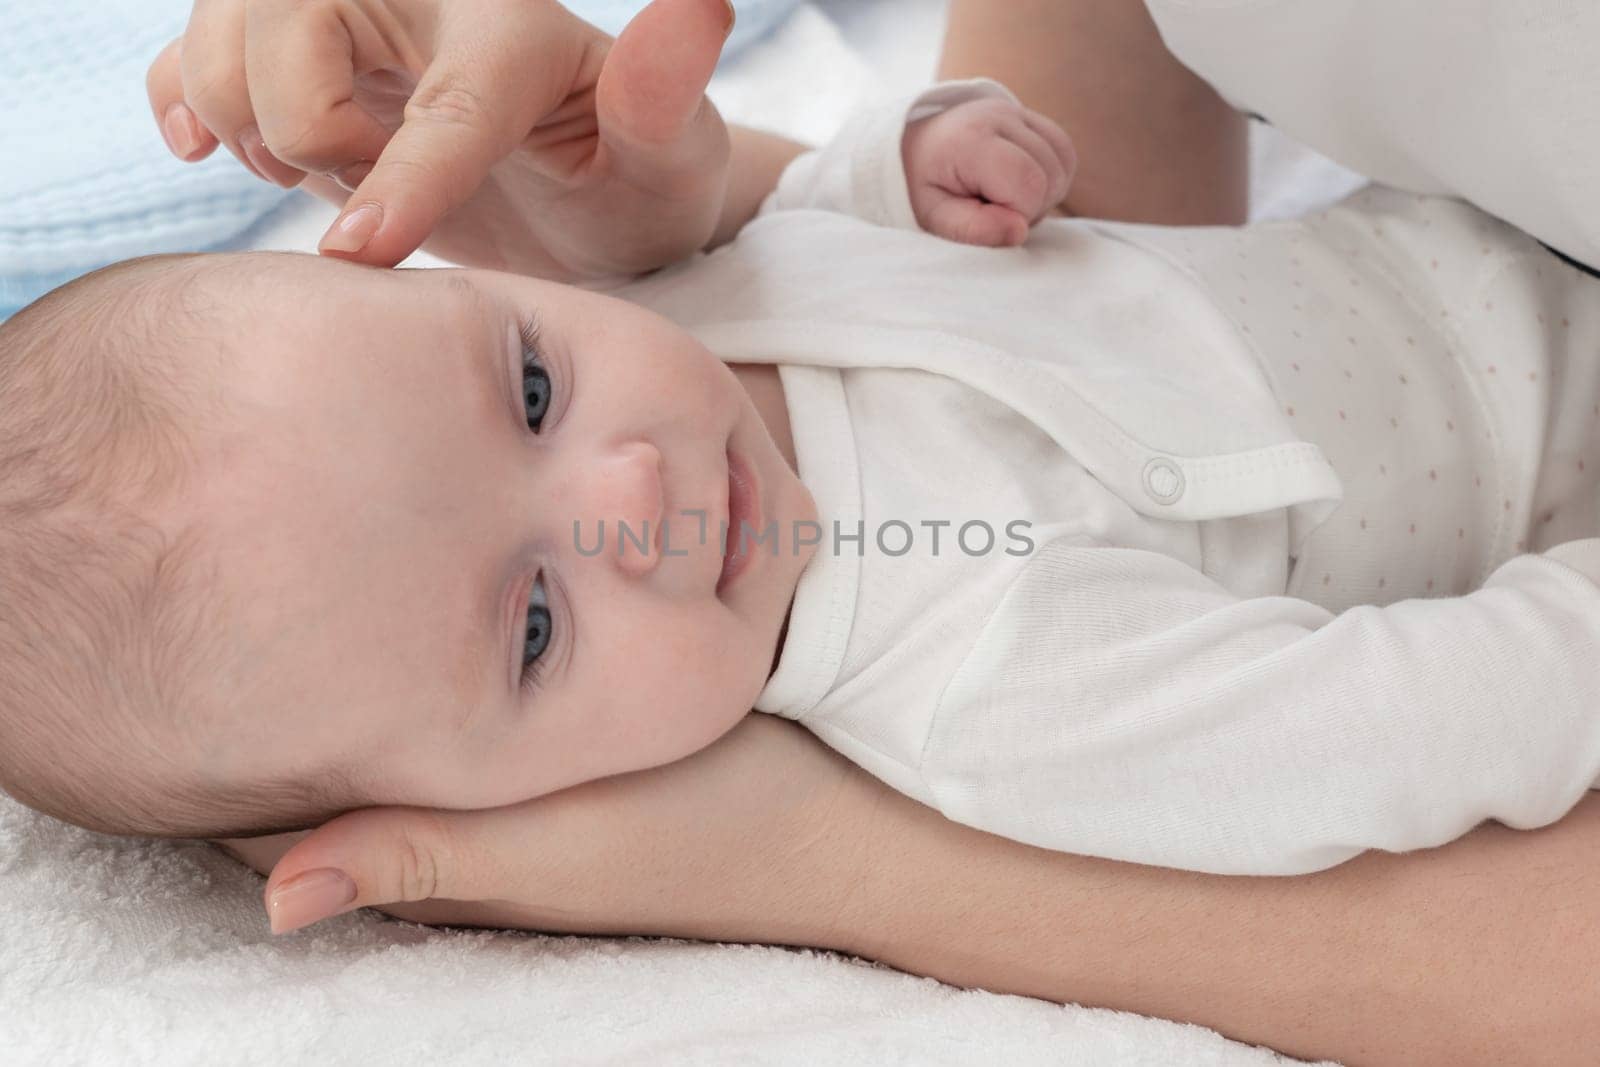 The mother gently touches the baby's head with her finger